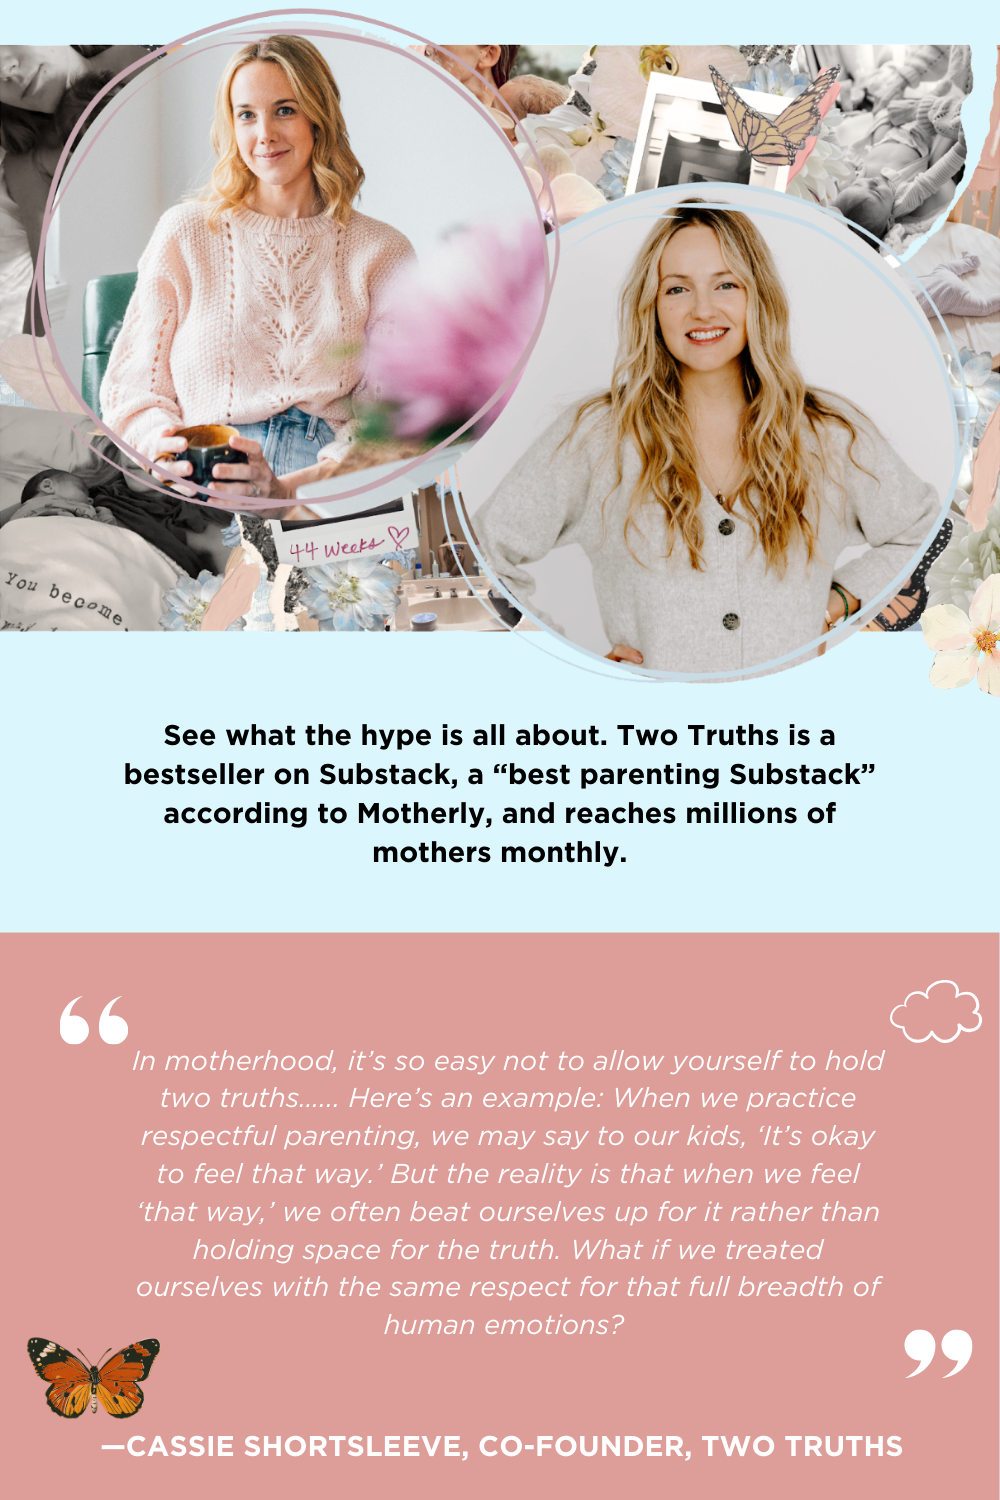 See what the hype is all about. Two Truths is a bestseller on Substack, a “best parenting Substack” according to Motherly, and reaches millions of mothers monthly. In motherhood, it’s so easy not to allow yourself to hold two truths…... Here’s an example: When we practice respectful parenting, we may say to our kids, ‘It’s okay to feel that way.’ But the reality is that when we feel ‘that way,’ we often beat ourselves up for it rather than holding space for the truth. What if we treated ourselves with the same respect for that full breadth of human emotions? —CASSIE SHORTSLEEVE, CO-FOUNDER, TWO TRUTHS